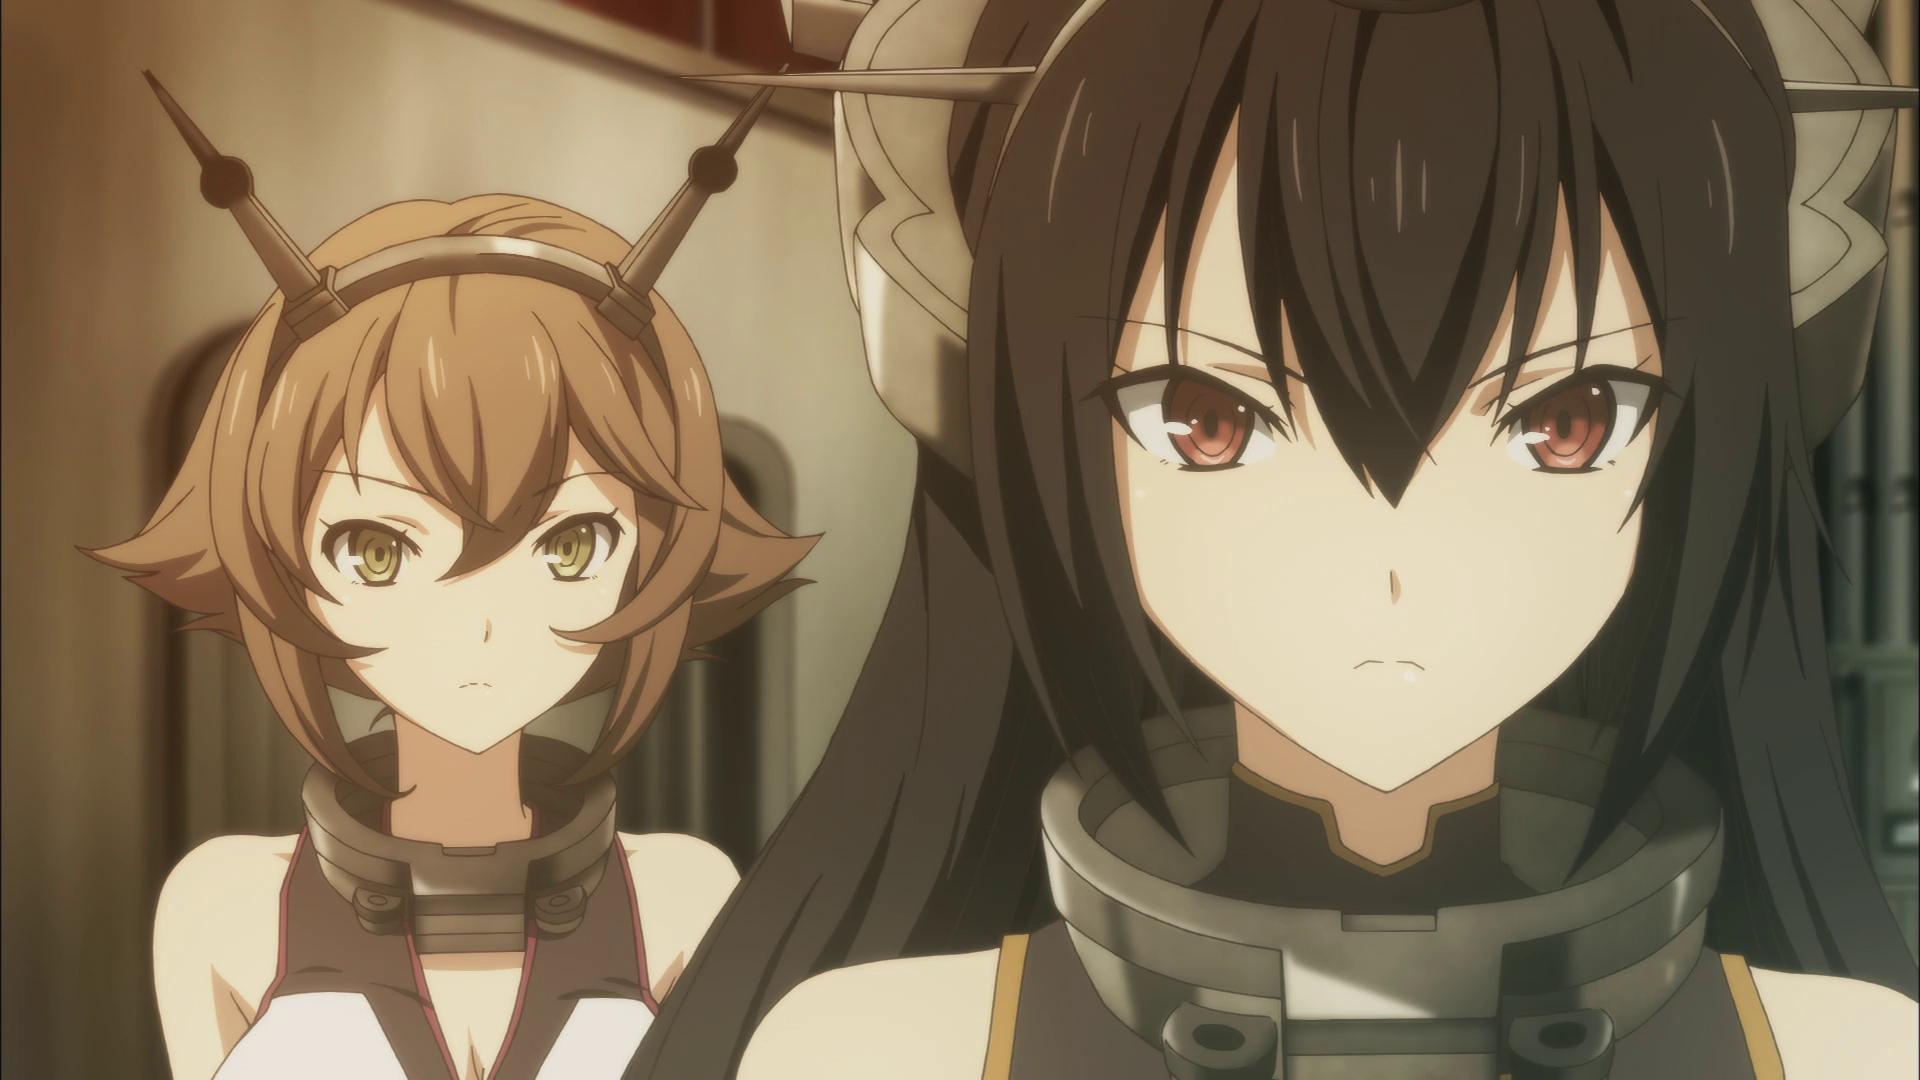 Kantai Collection episode 1 impressions. Dropped due to meh-ness